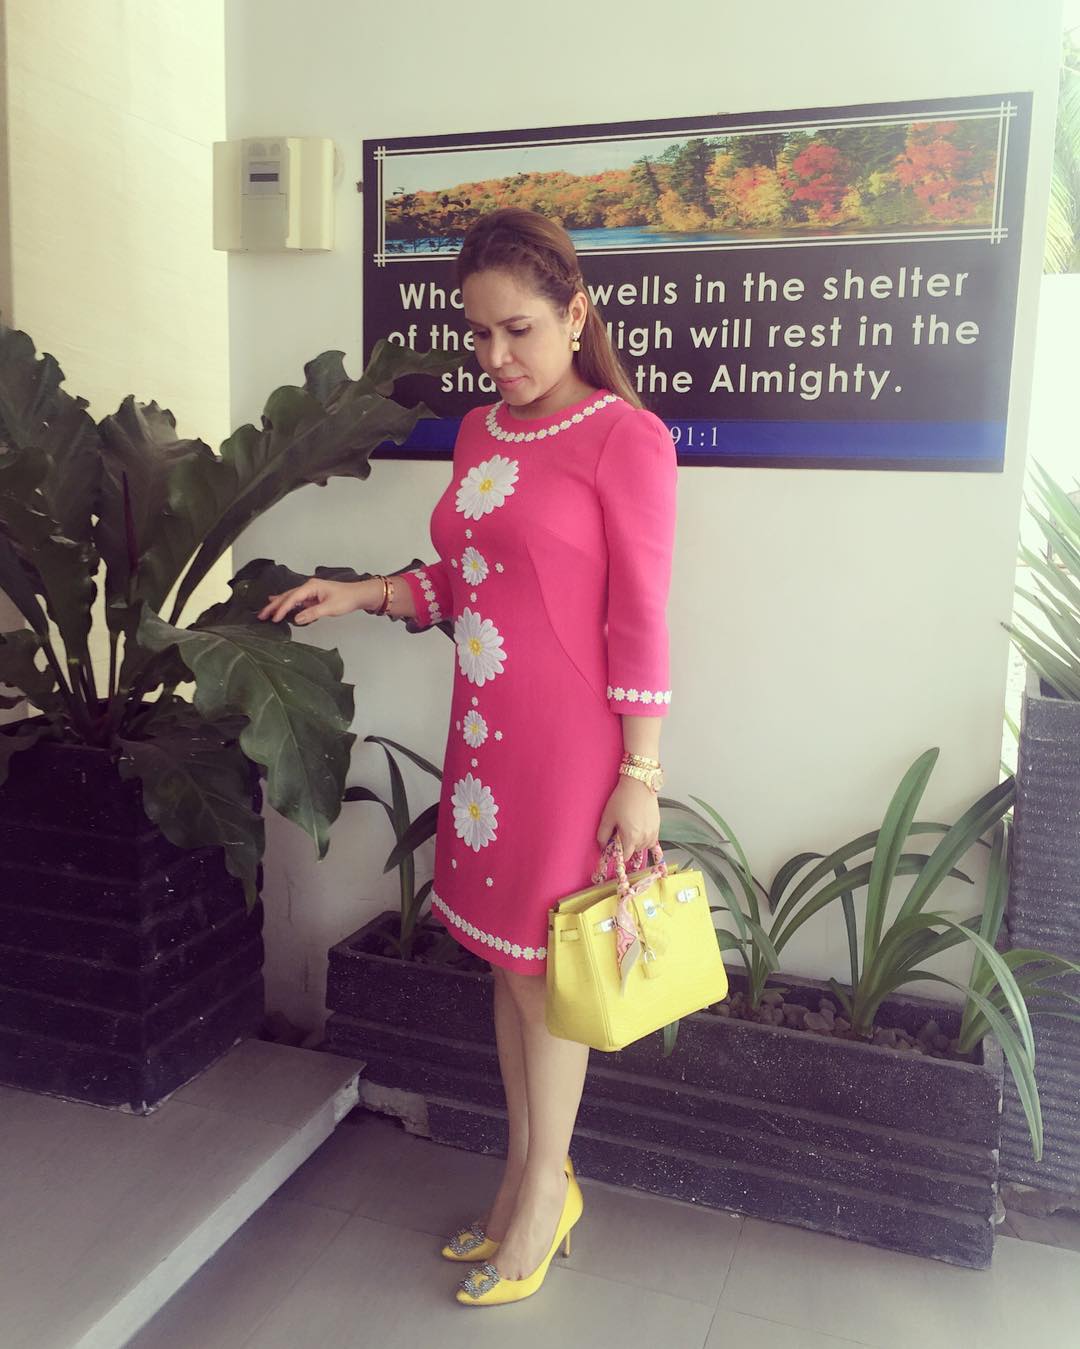 13 Things We'd Love To Steal From Jinkee Pacquiao's Designer